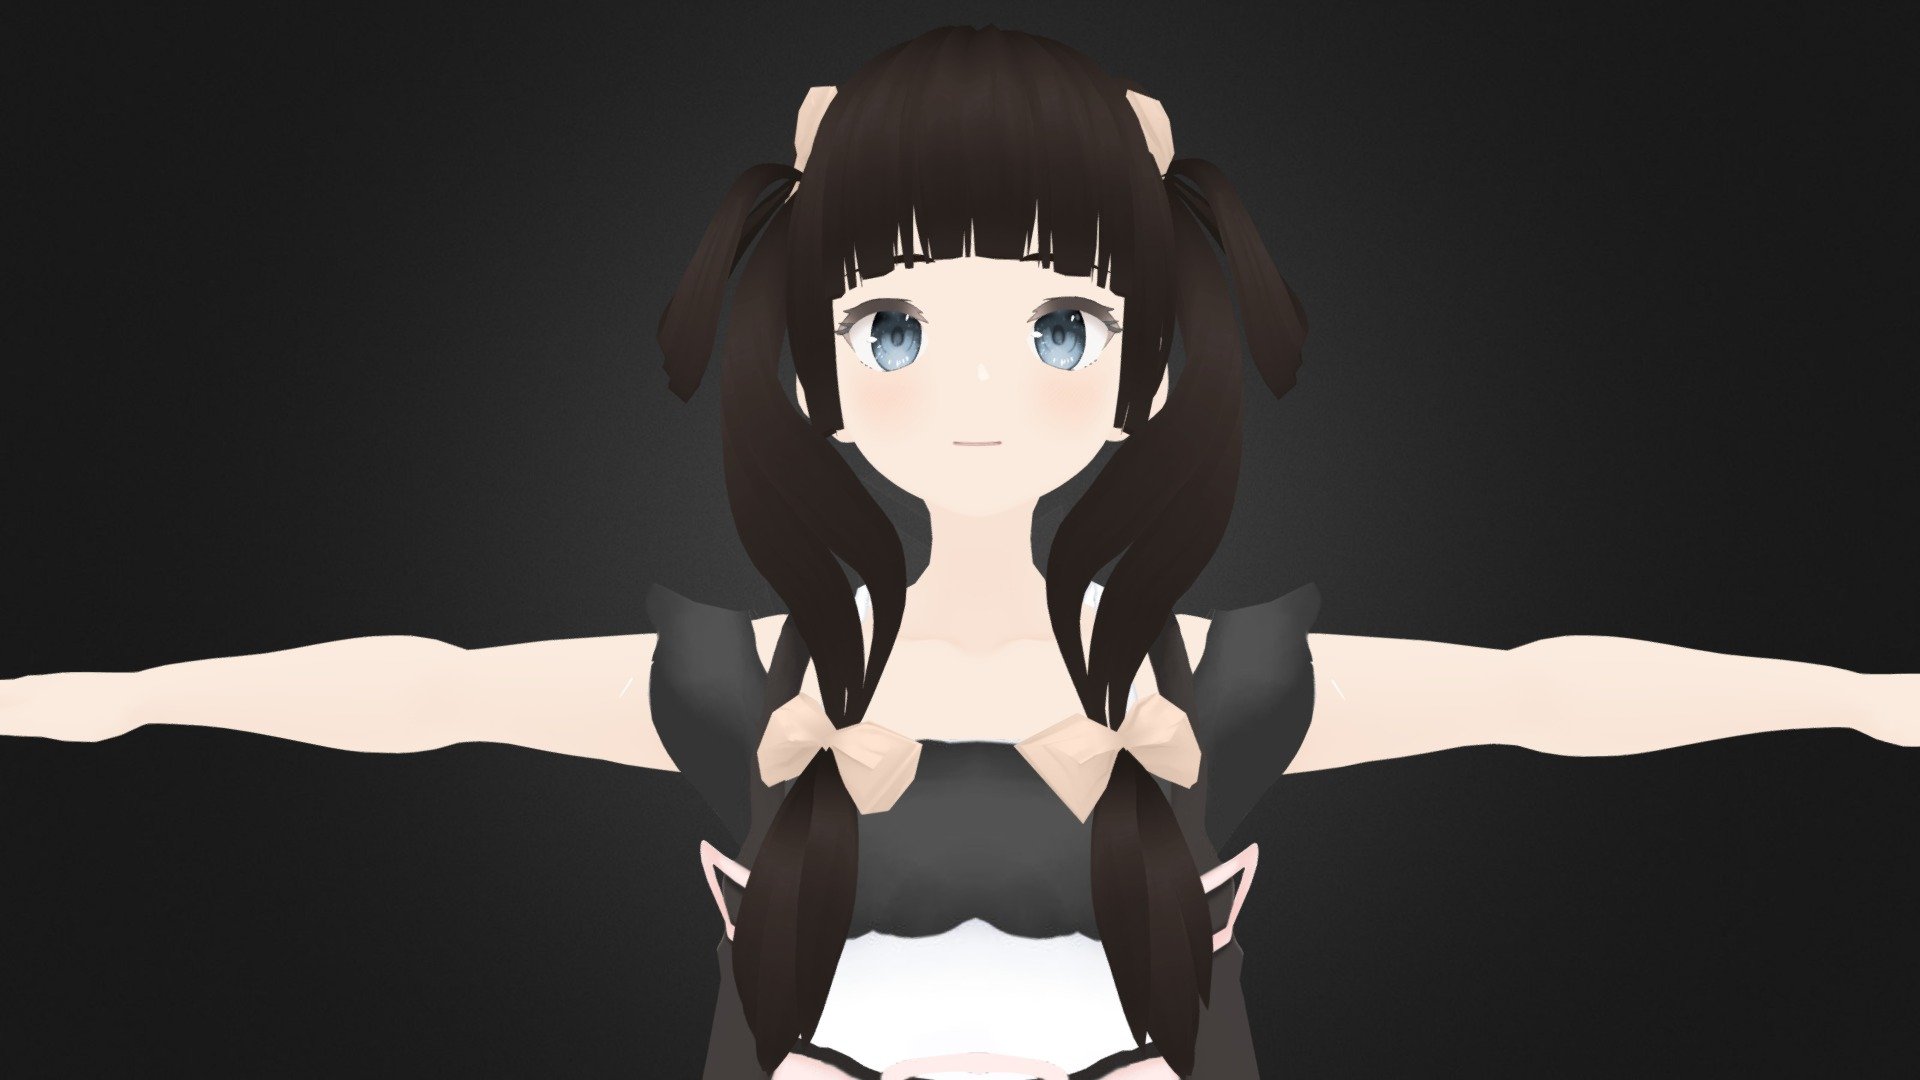 3d Anime Character Girl For Blender 27 Buy Royalty Free 3d Model By Cgtoon Cgbest 7d1661e 6159